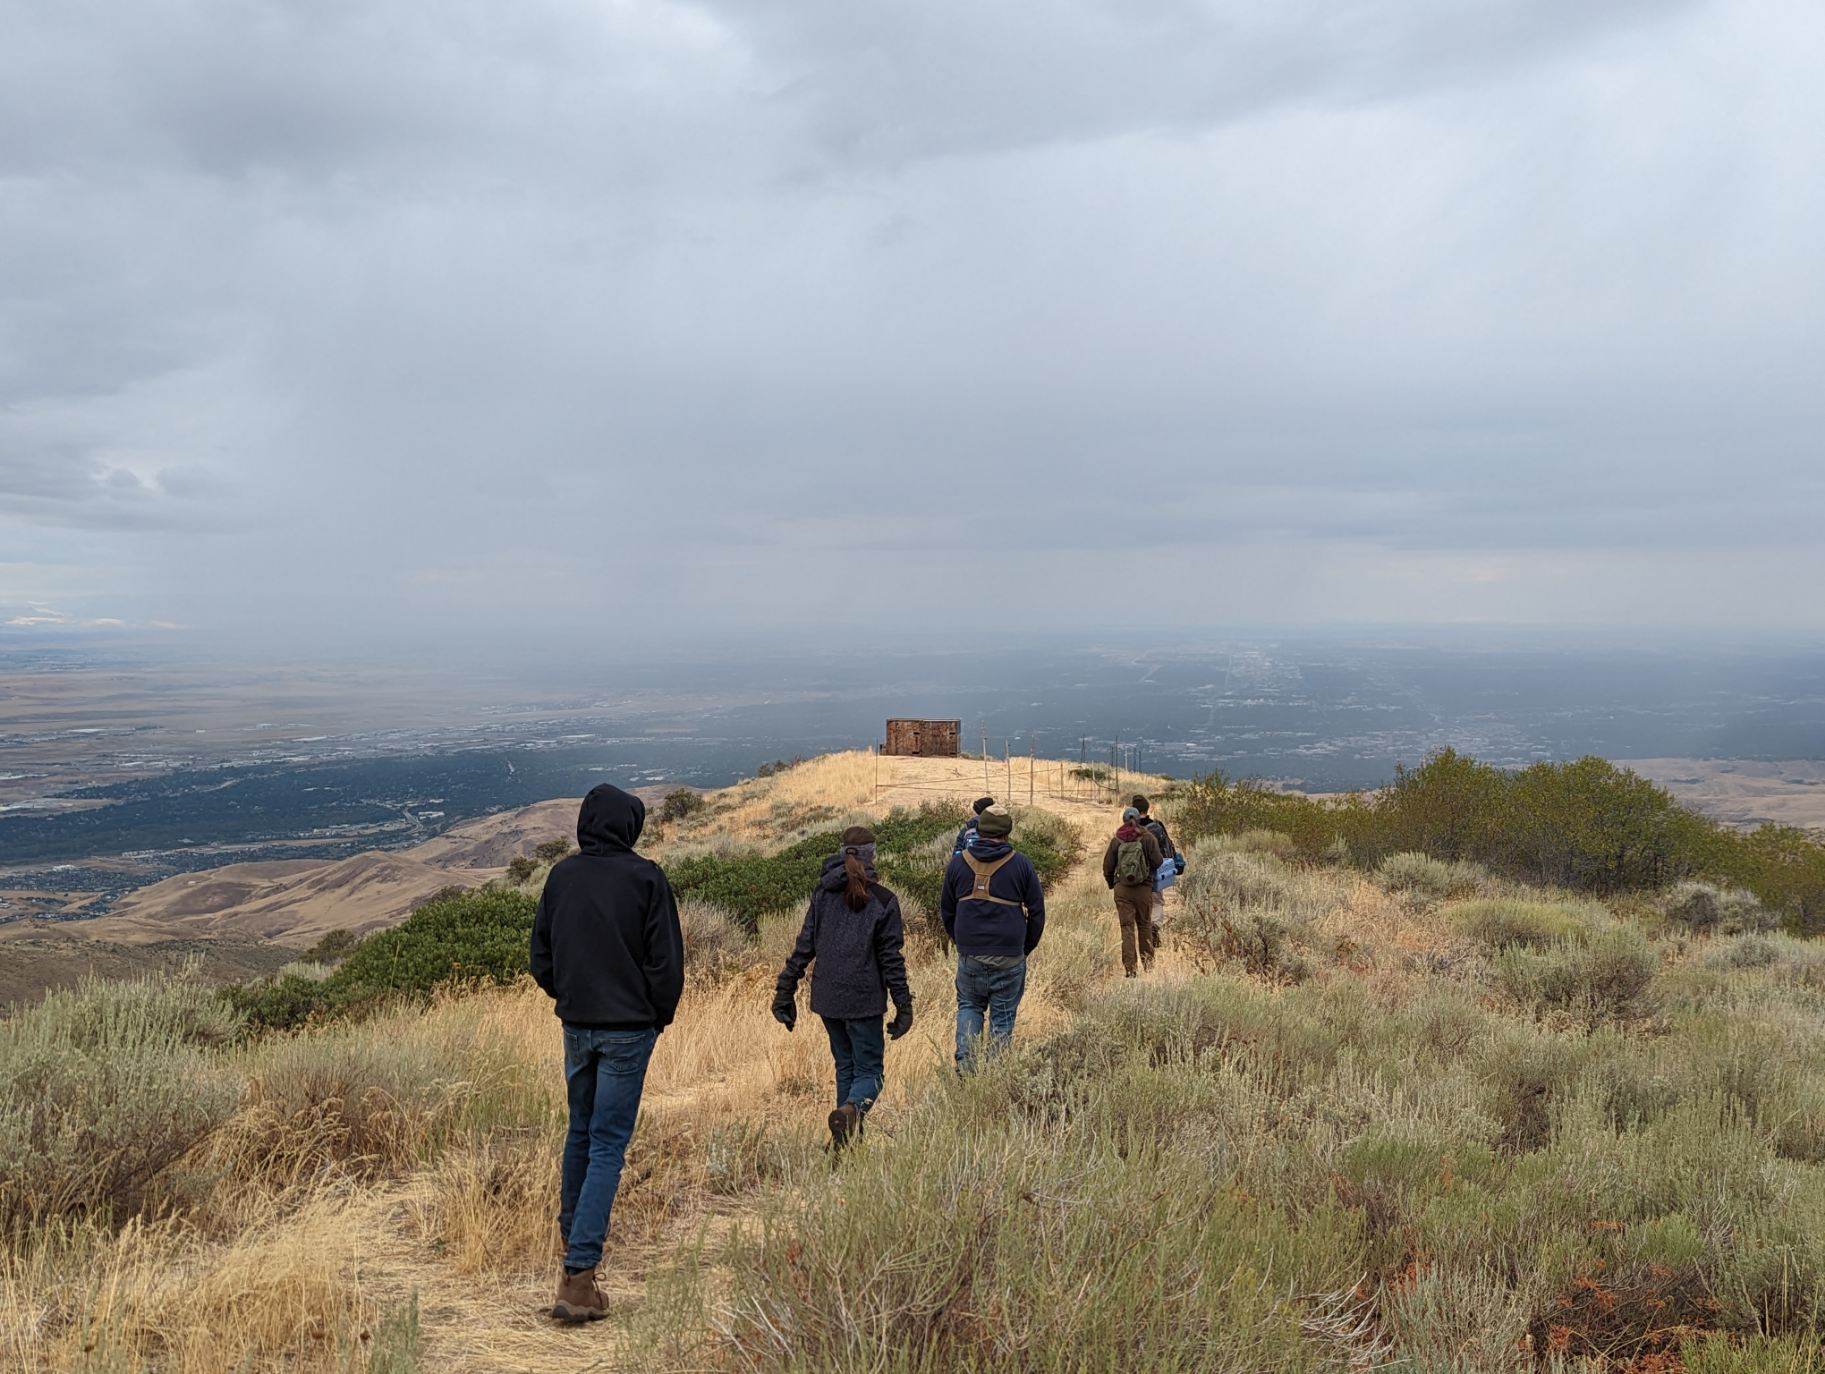 four people walk down a trail through sagebrush and grass, toward the small wooden hawk blind. Boise can be seen in the backdrop in the valley below